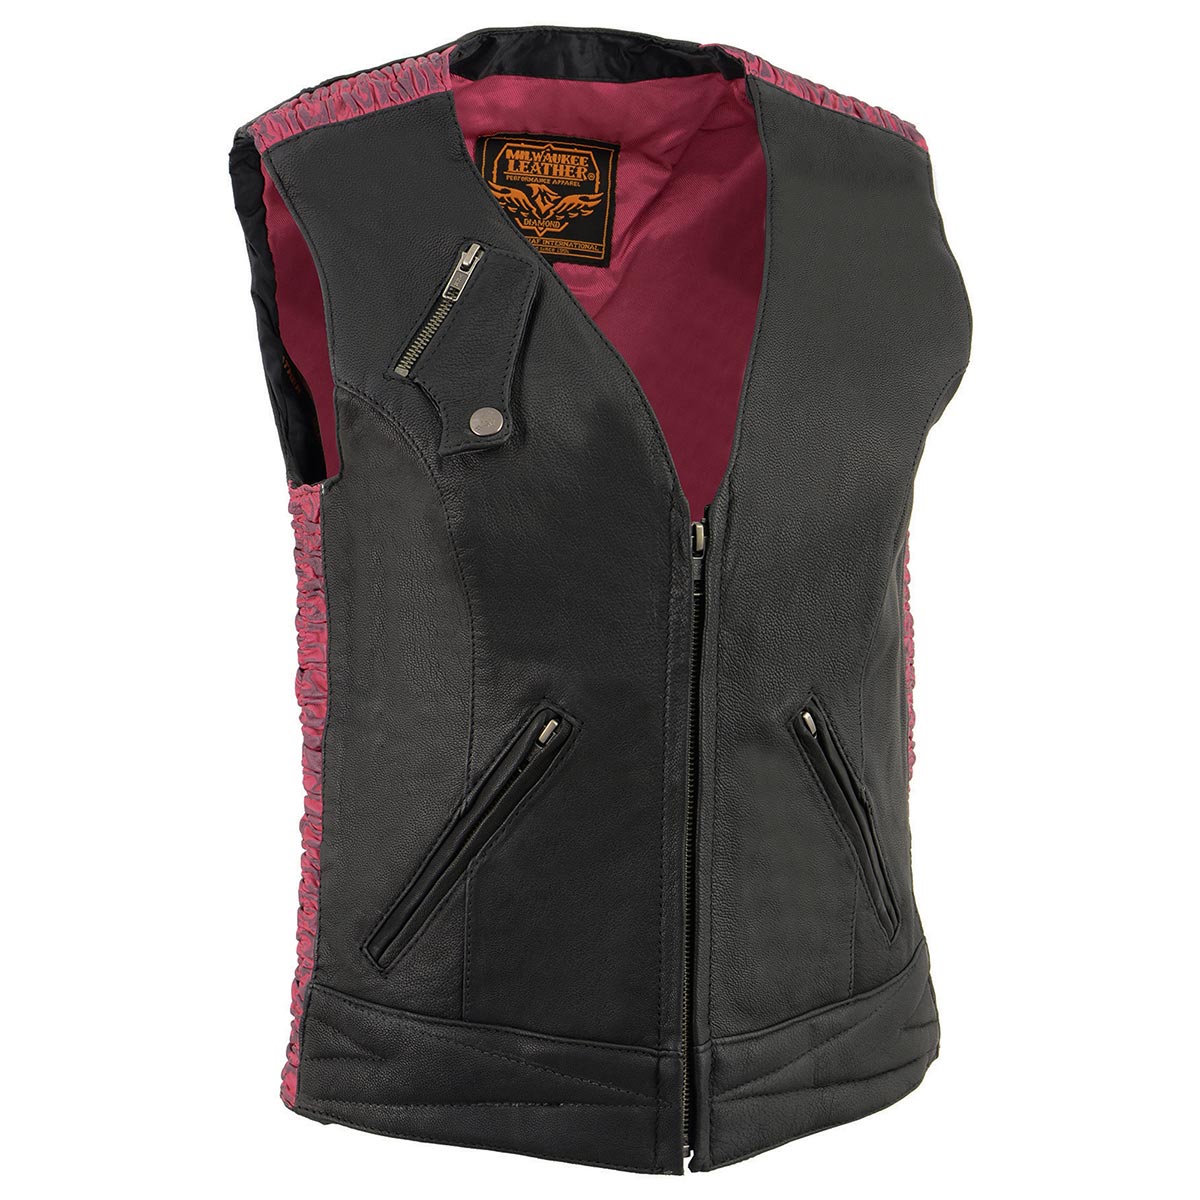 Milwaukee Leather MLL4571 Women's Black and Pink Lightweight Motorcycle Leather Vest w/ Crinkled Leather Design